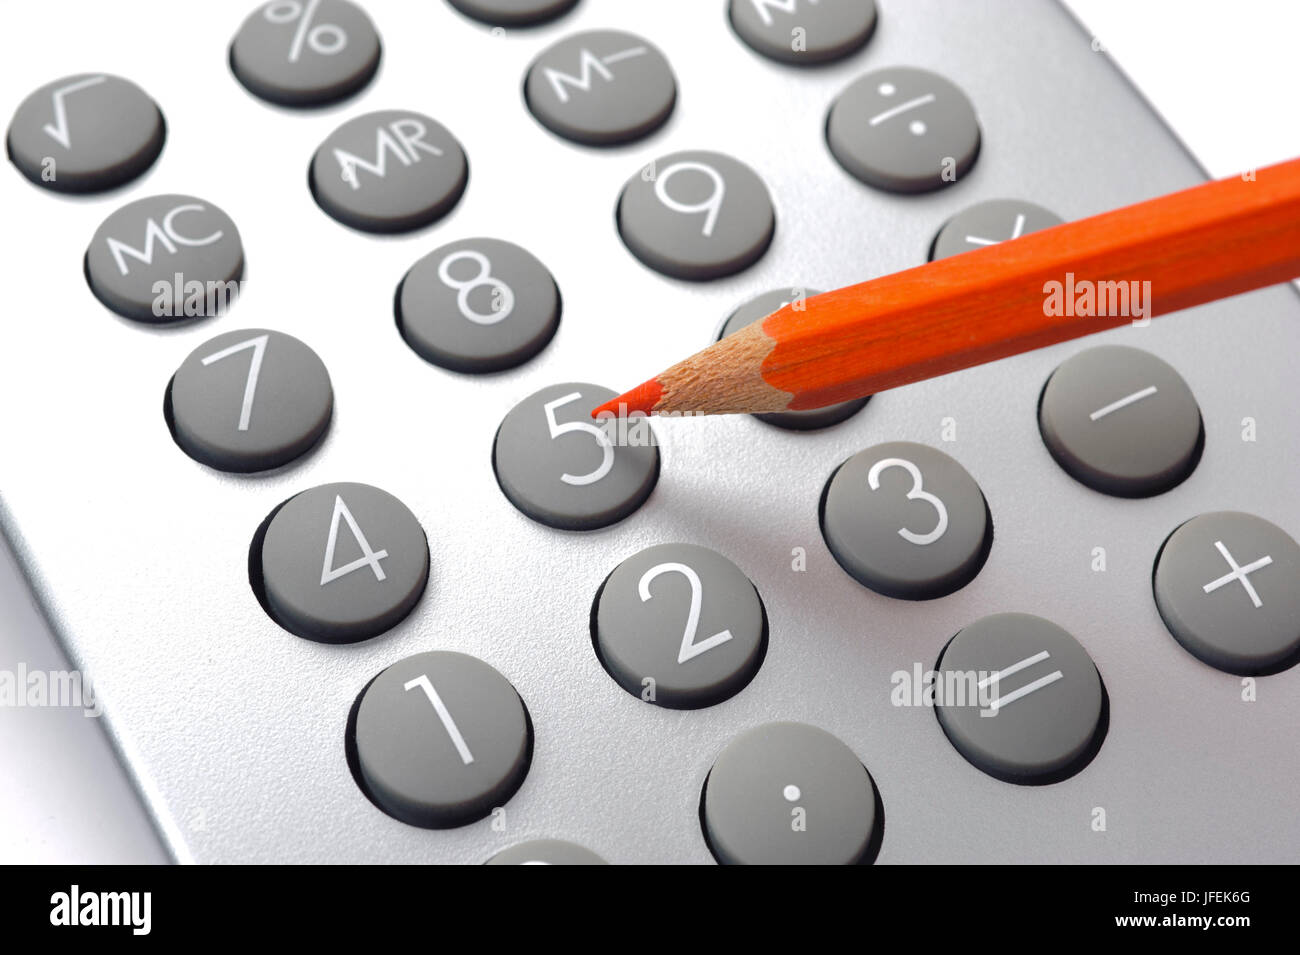 Red pen on electronic calculator Stock Photo